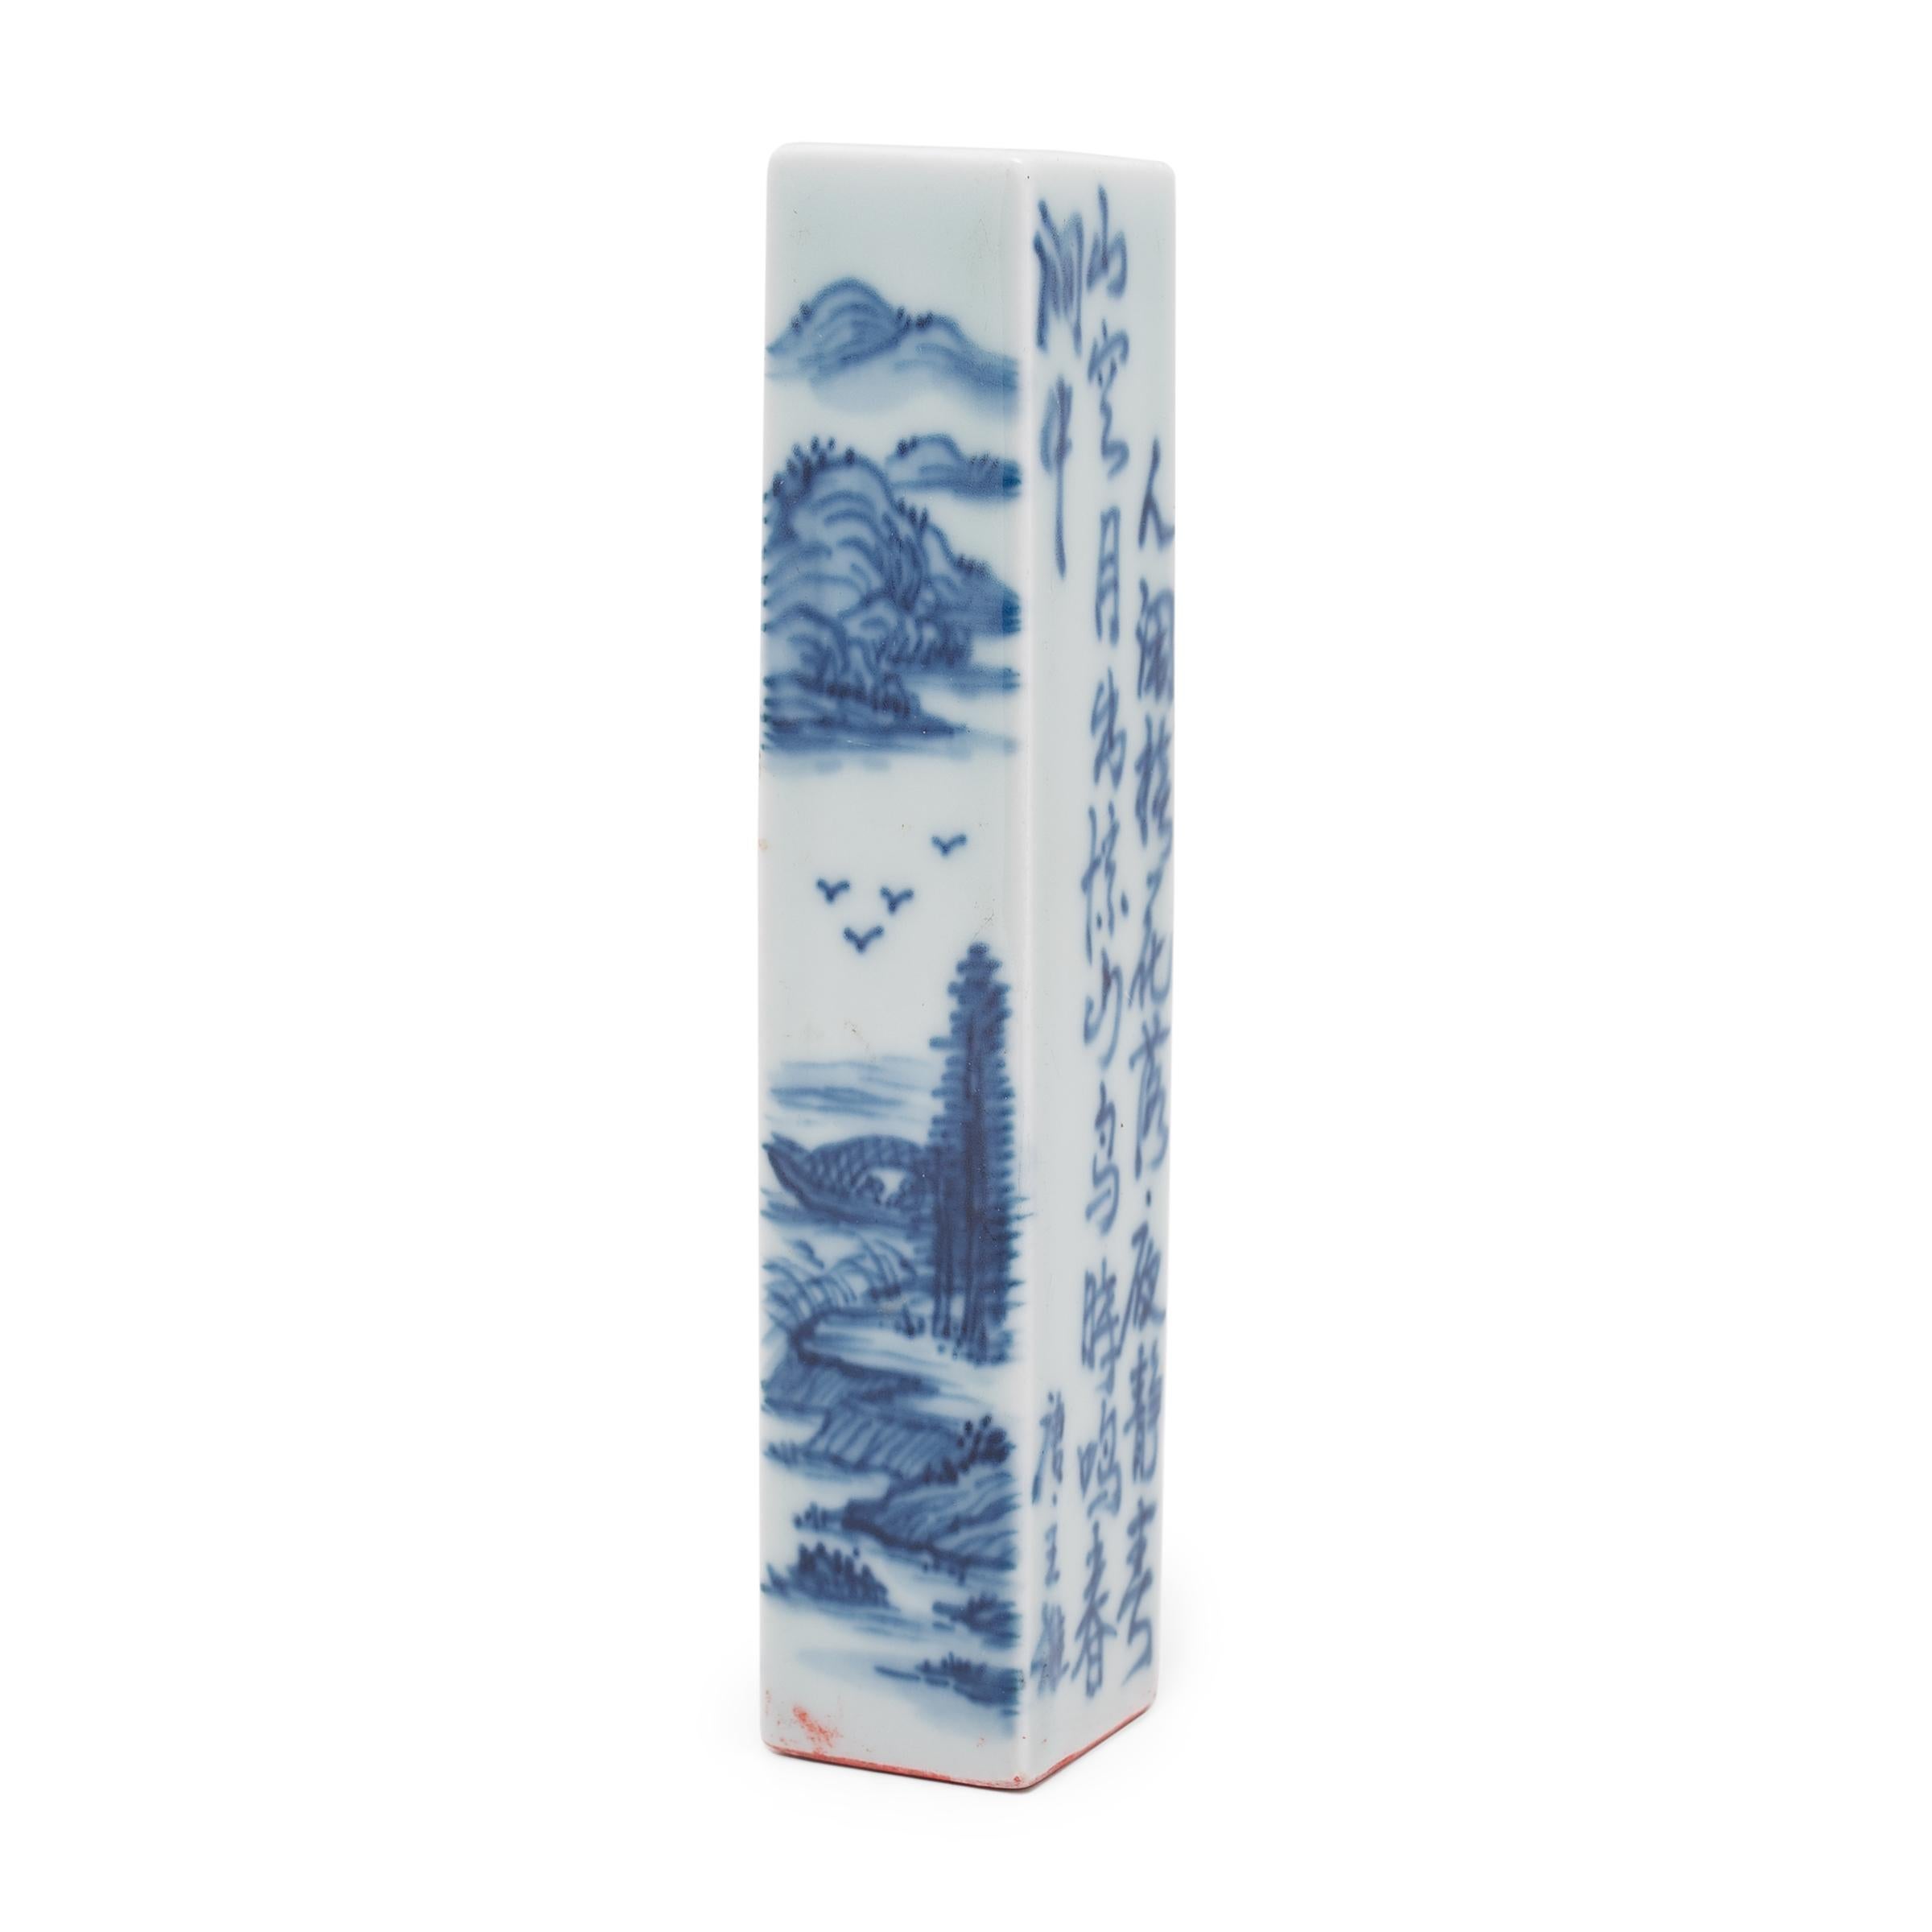 This small porcelain column recreates the personalized seals used to sign important documents throughout the Ming and Qing dynasties. Also known as a chop, such stamps were widely used by anyone who regularly signed formal documents, such as